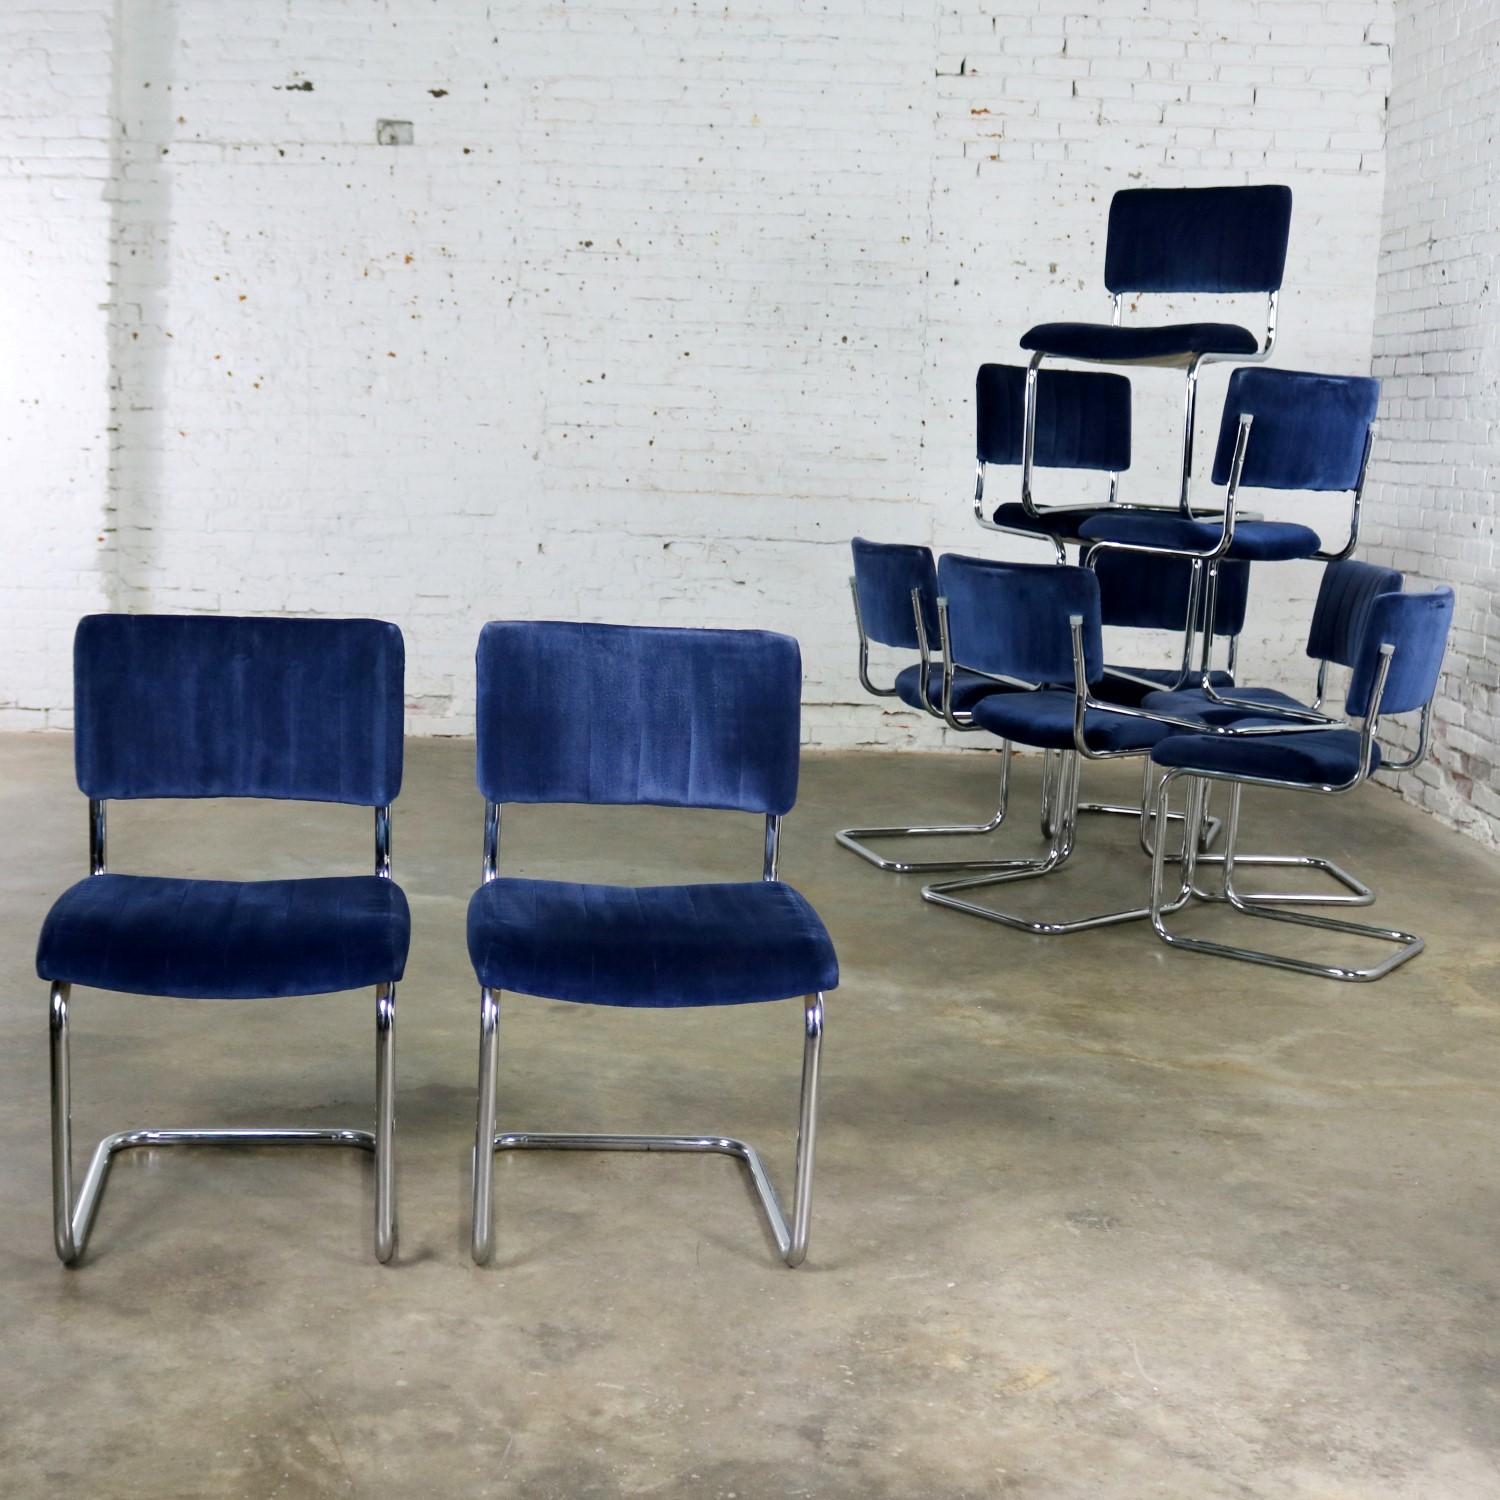 American Cantilevered Chrome and Blue Velvet Dining Chairs after Marcel Breuer Cesca